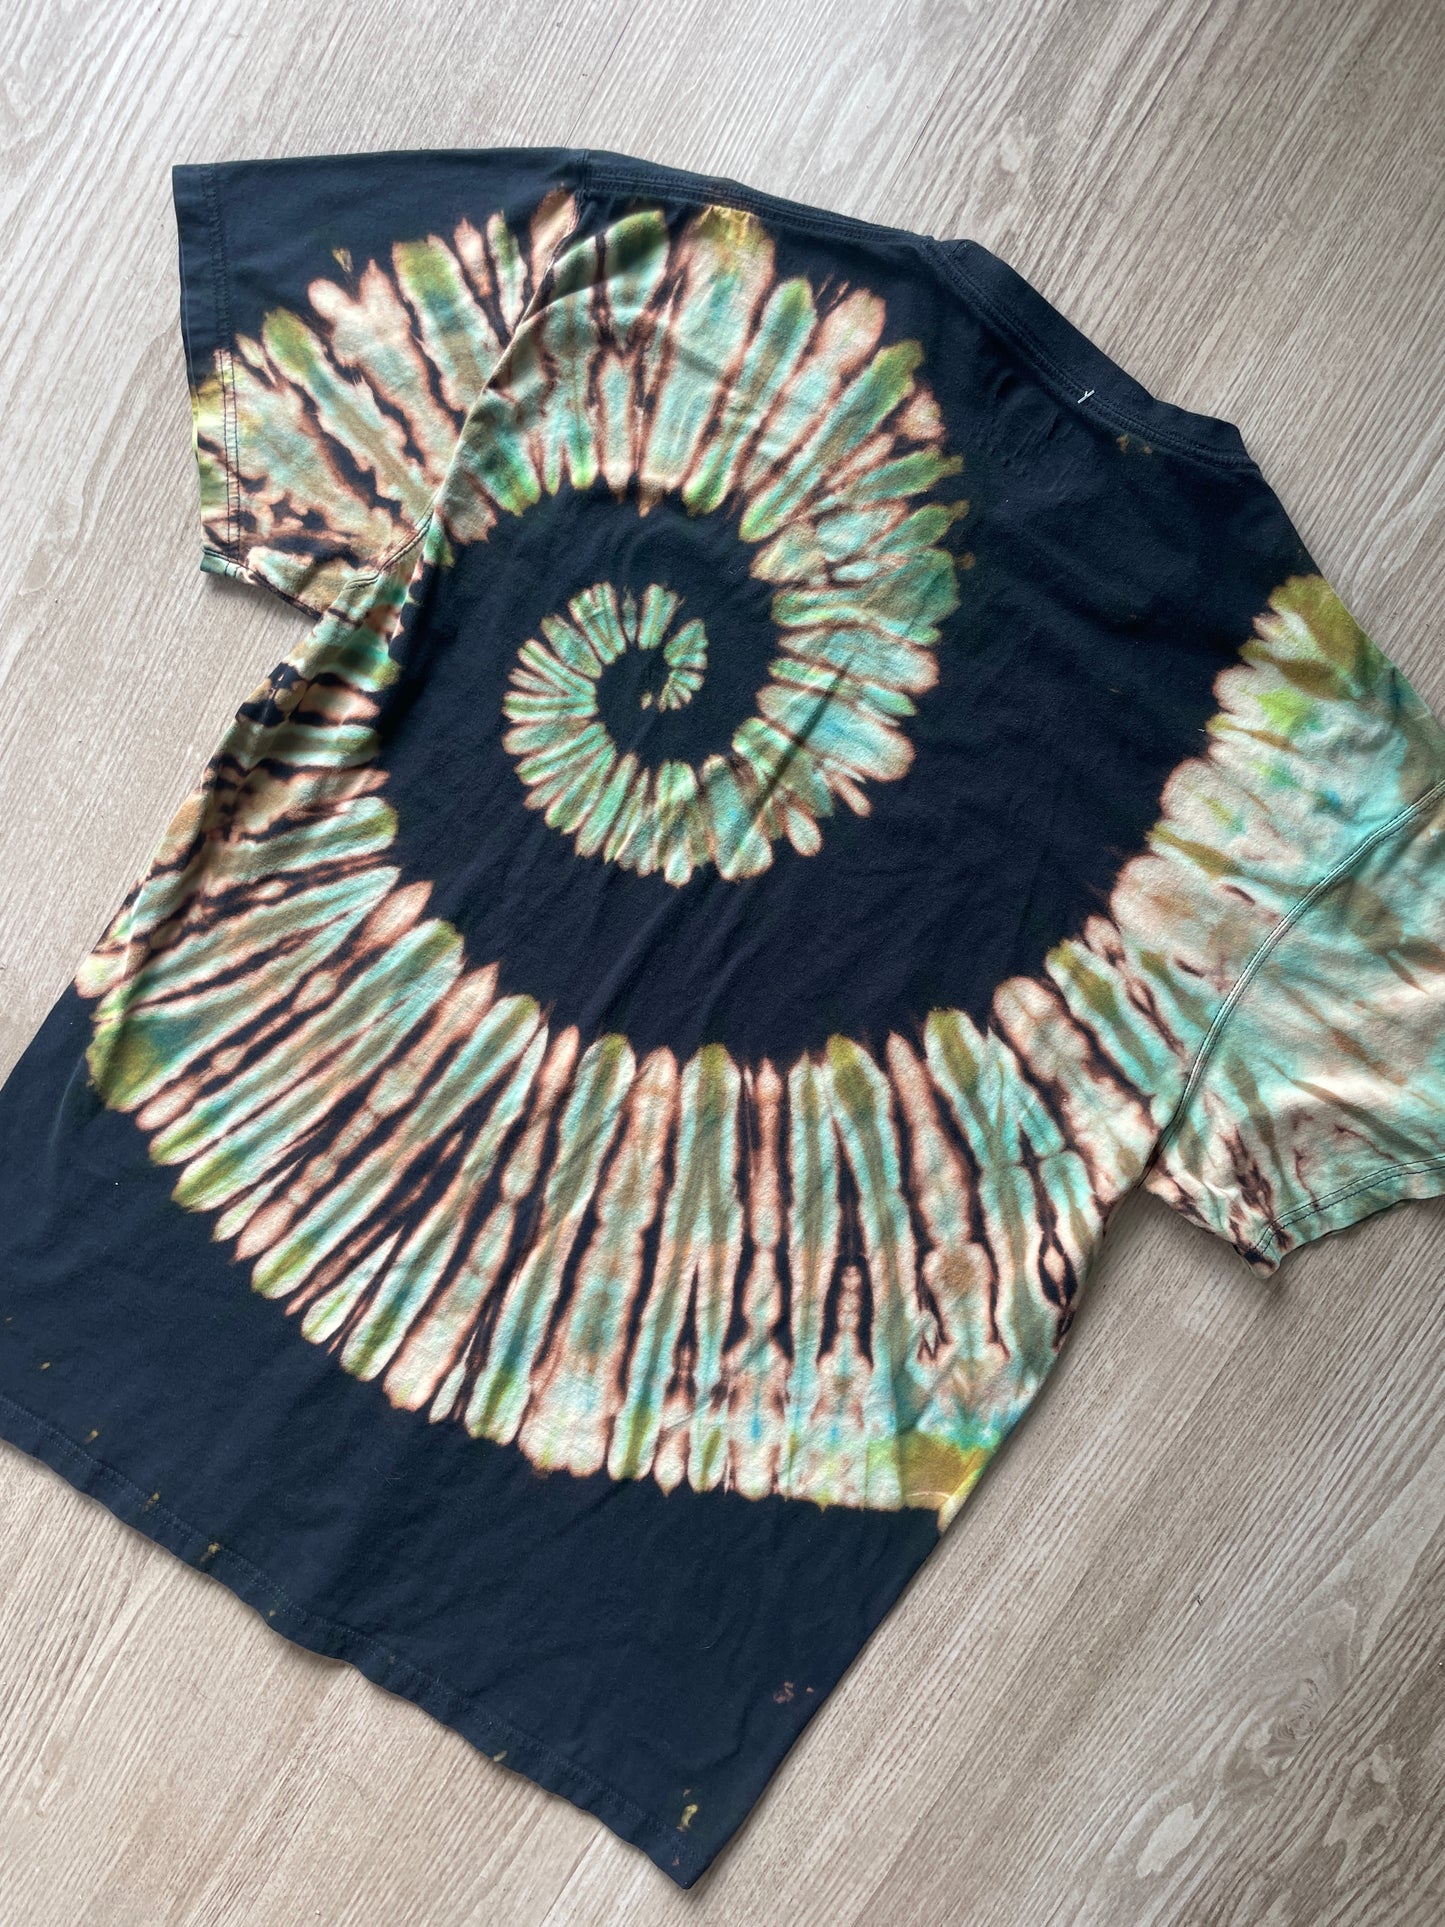 XL Men’s 5.11 Climbing Shoe Handmade Reversed Tie Dyed T-Shirt | One-Of-a-Kind Green and Black Short Sleeve